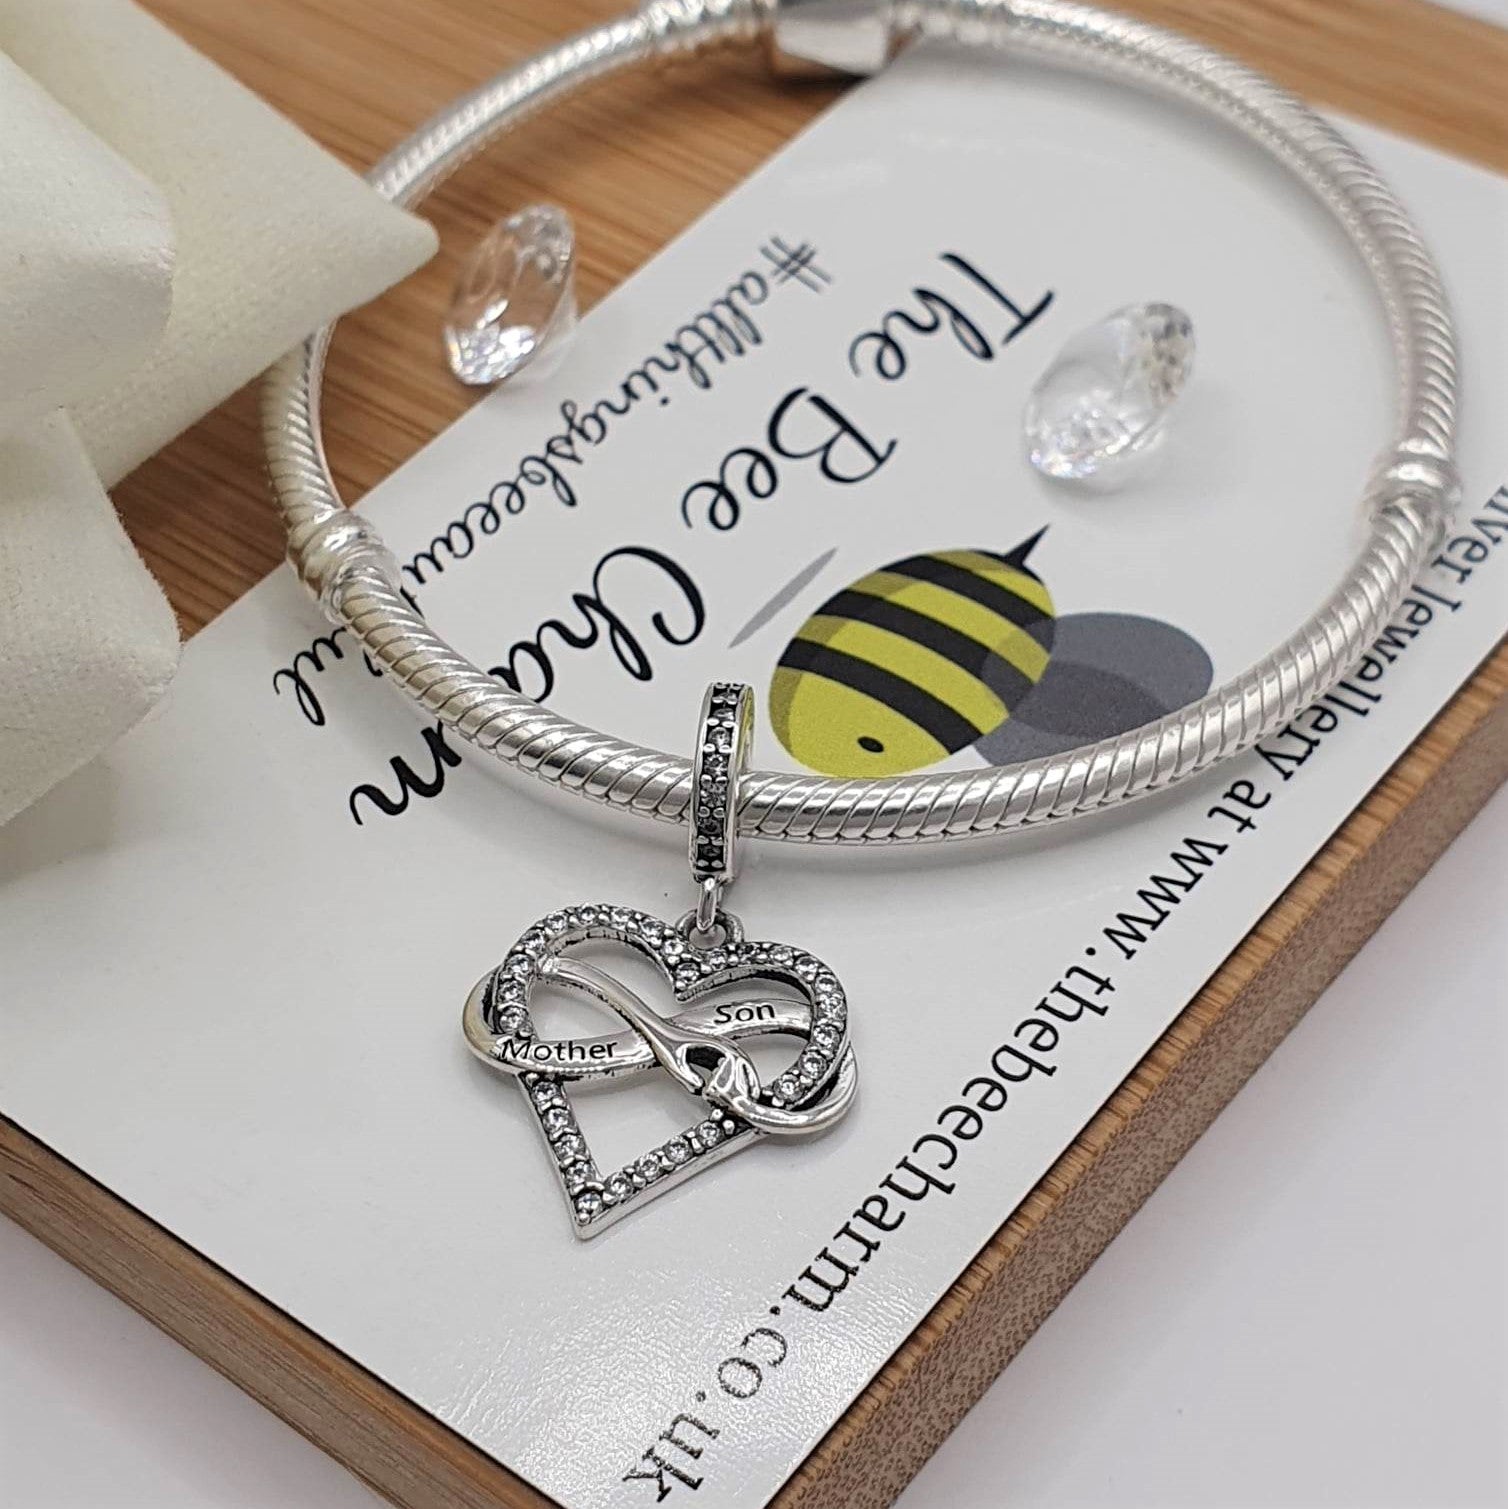 Mother & Son Love Charm - The Bee Charm